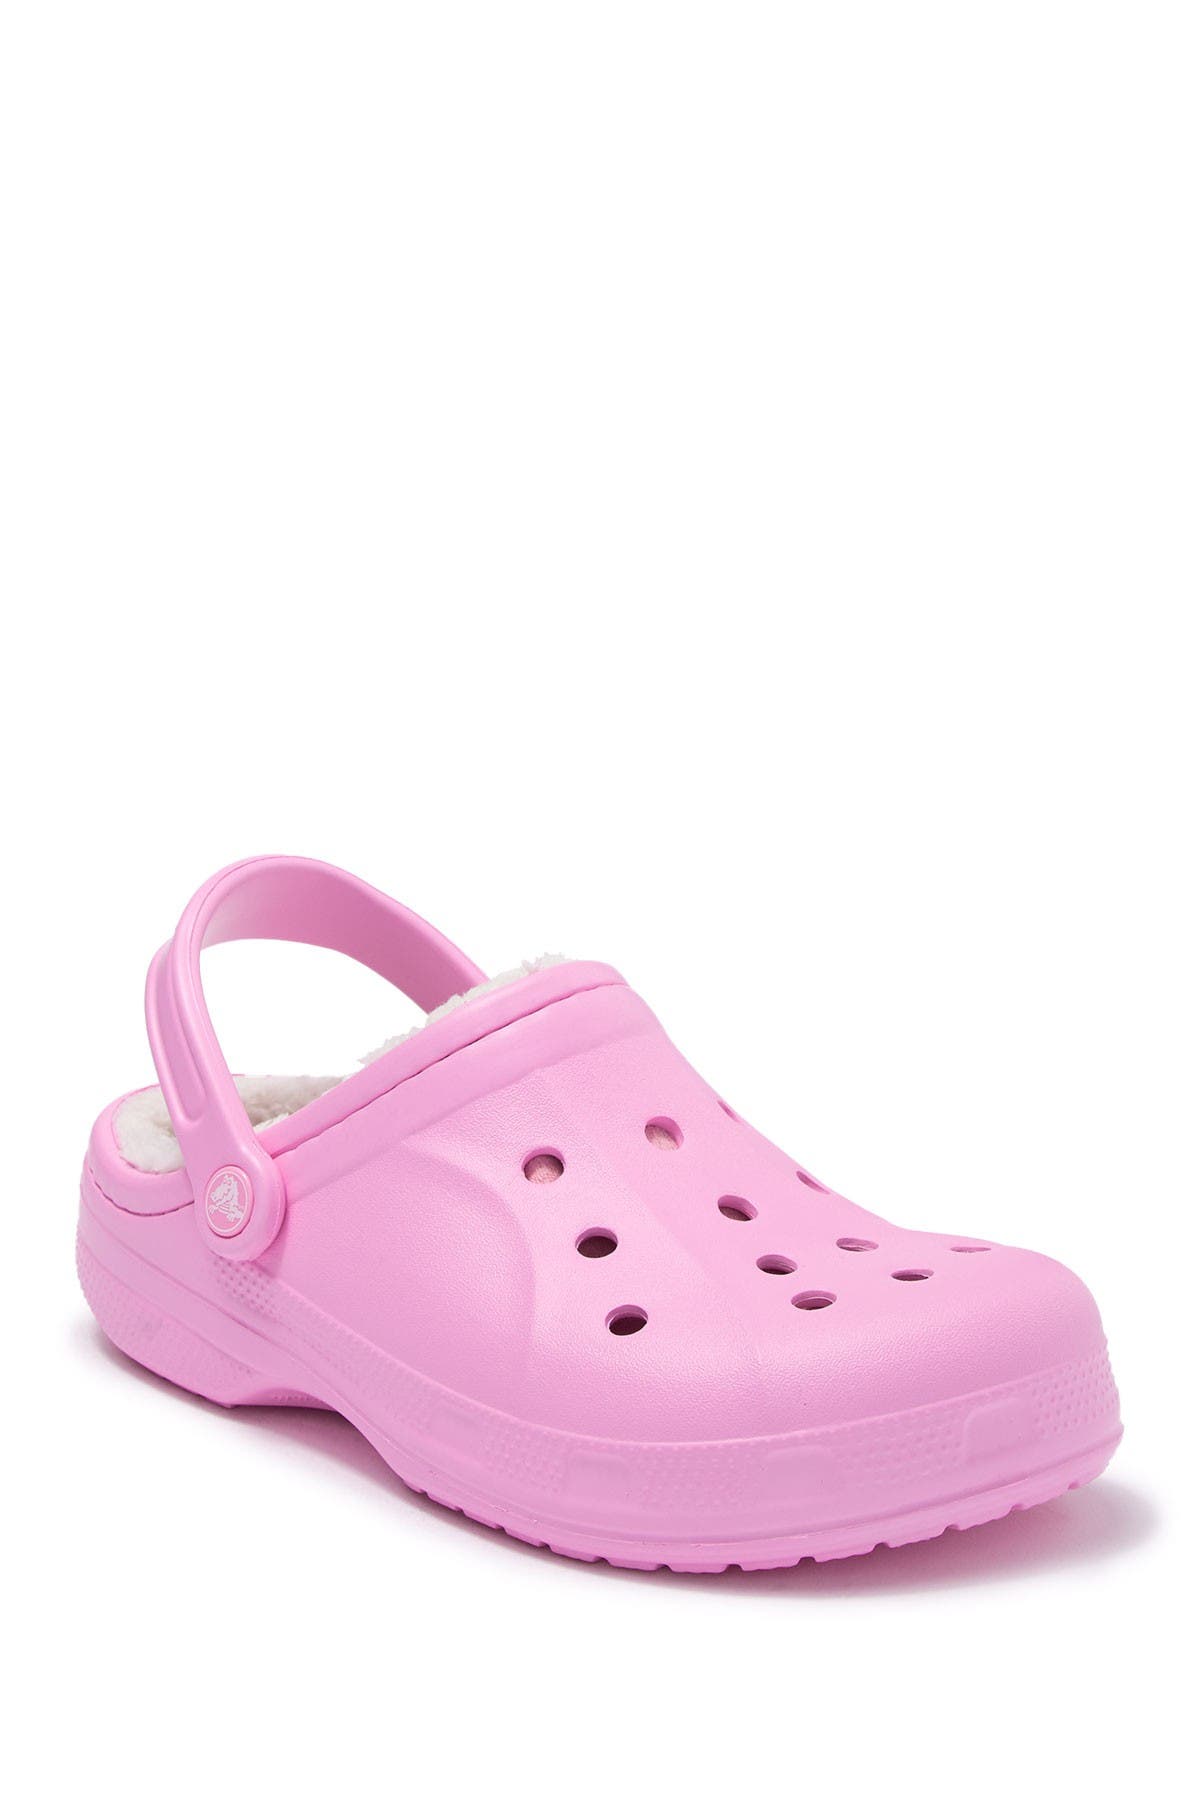 pink fuzzy lined crocs